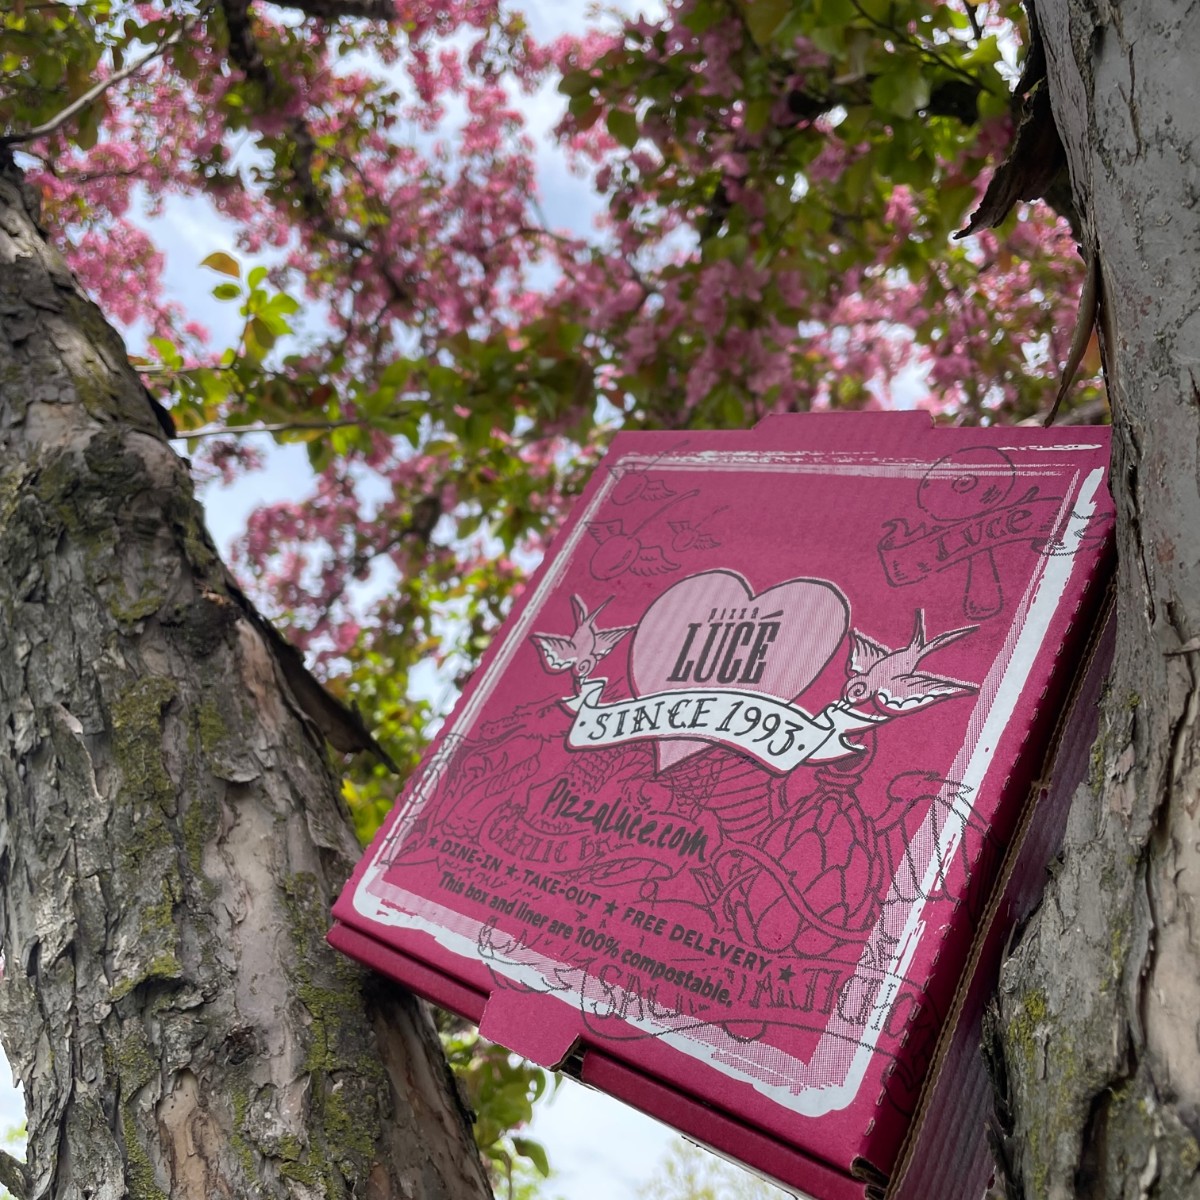 Keep lending a hand to Mother Earth by composting our pizza boxes! And soak up the best planet out there. Happy Earth Day! #hugatree #compostyourpizzabox #happyearthdayeveryday